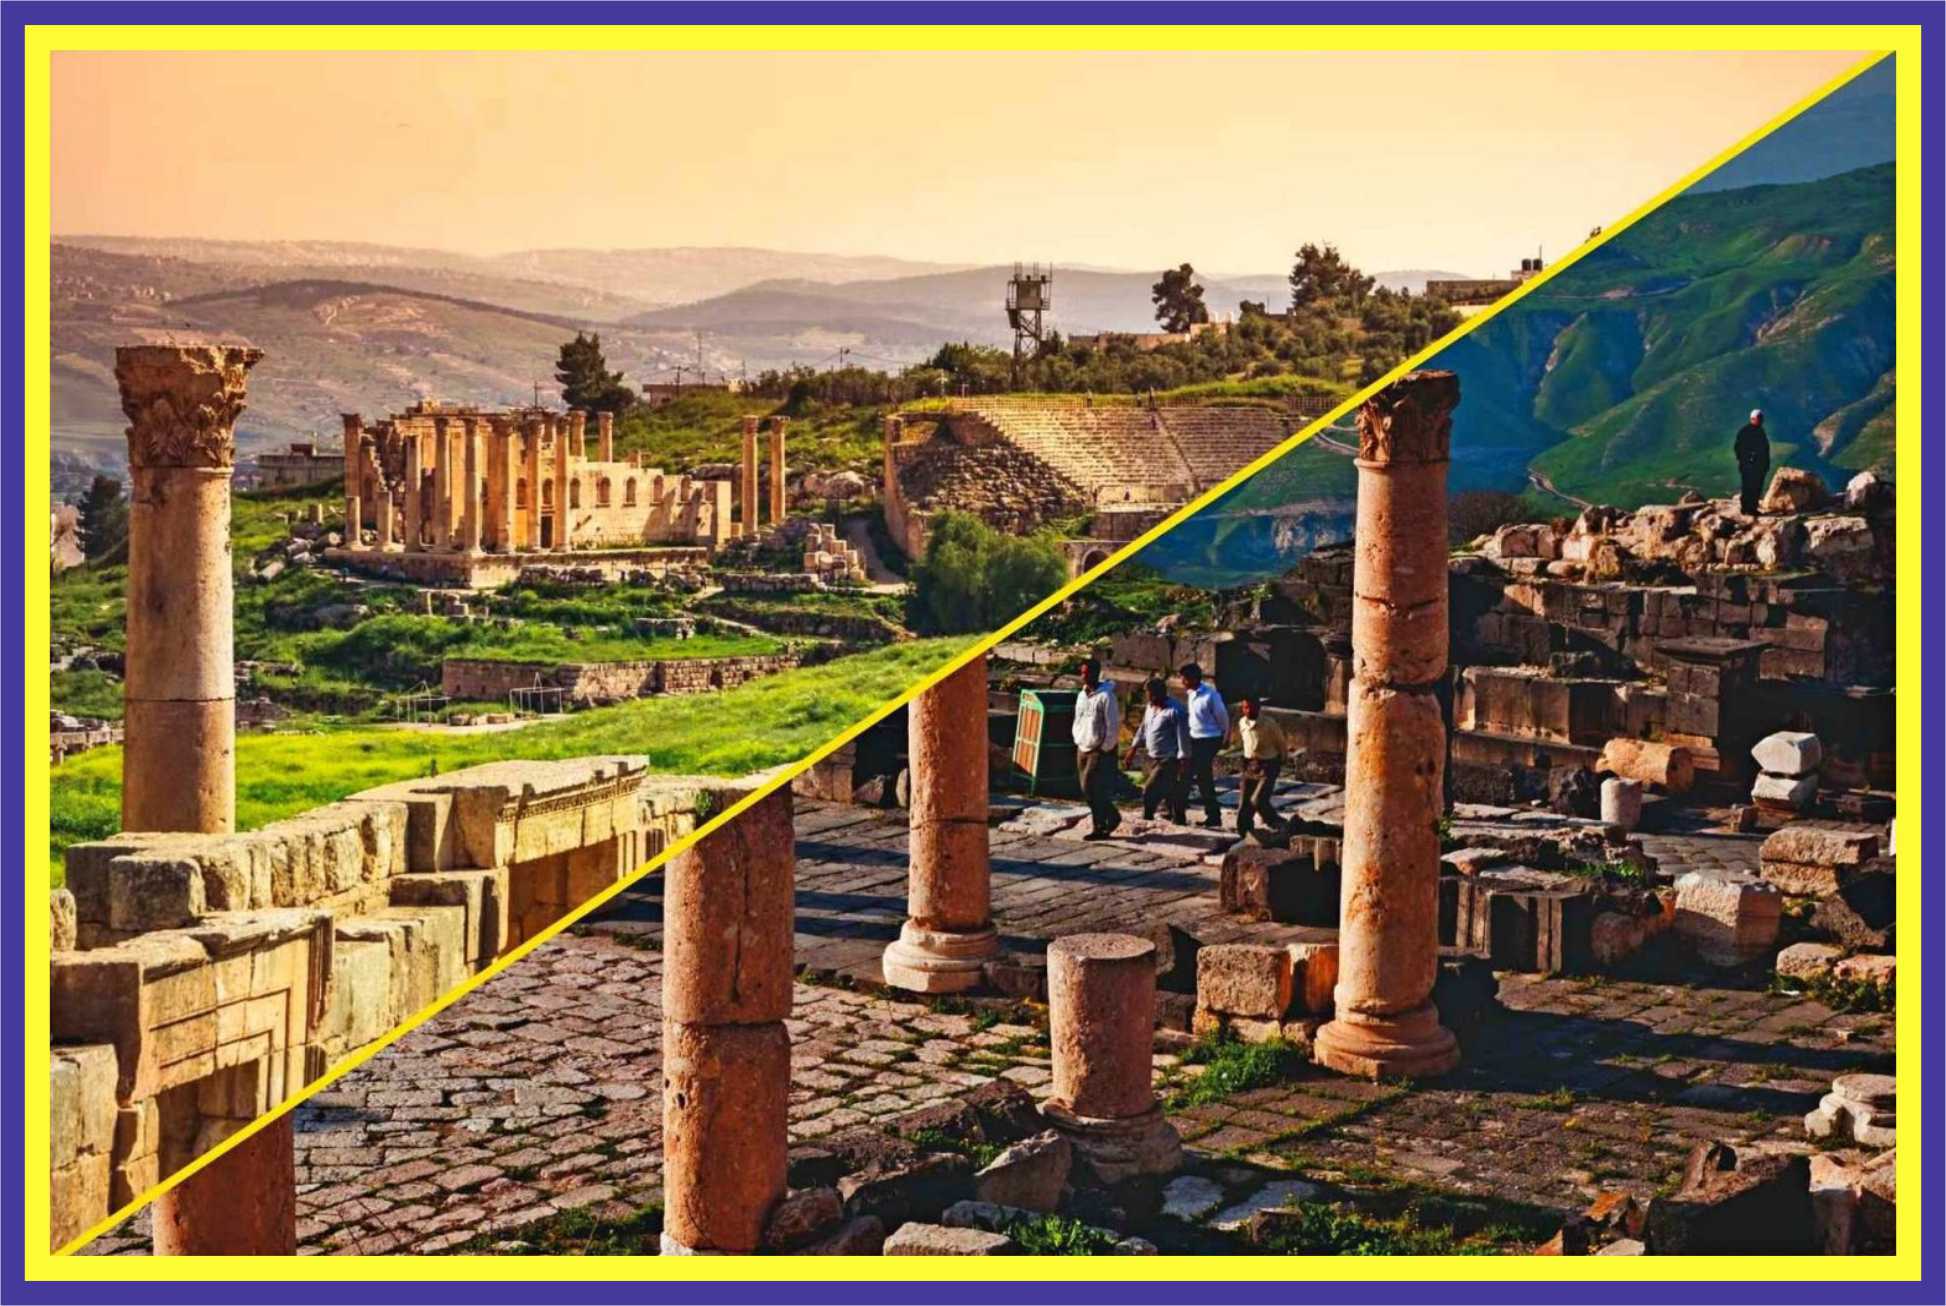 Umm Qais, Jerash, and Ajloun Day Tour, Discover the historical trifecta on a guided day tour, Best Umm Qais, Jerash, and Ajloun day excursion, Explore the wonders of Umm Qais, Jerash, and Ajloun in Jordan, Guided day tour to Umm Qais, Jerash, and Ajloun highlights, Uncover the treasures of Umm Qais, Jerash, and Ajloun, Immersive Umm Qais, Jerash, and Ajloun cultural exploration, Top attractions in Umm Qais, Jerash, and Ajloun revealed, Umm Qais, Jerash, and Ajloun historical heritage tour, Experience the charm of Umm Qais, Jerash, and Ajloun in a day, Best day trip to Umm Qais, Jerash, and Ajloun landmarks, Umm Qais, Jerash, and Ajloun historical sites at their finest, Enhance your travel with a Umm Qais, Jerash, and Ajloun day tour, Immersive Umm Qais, Jerash, and Ajloun sightseeing adventure, Cultural delight: Umm Qais, Jerash, and Ajloun, Jordan